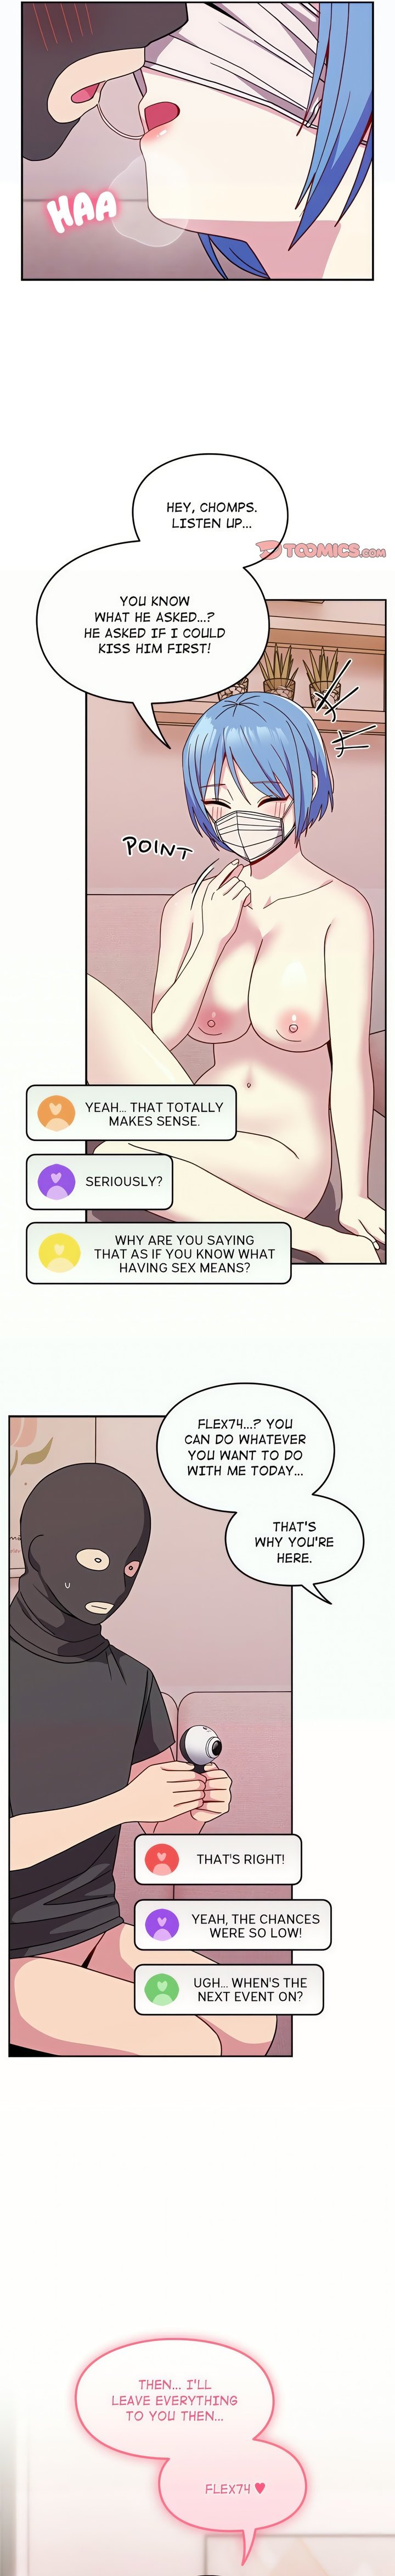 when-did-we-start-dating-chap-41-19